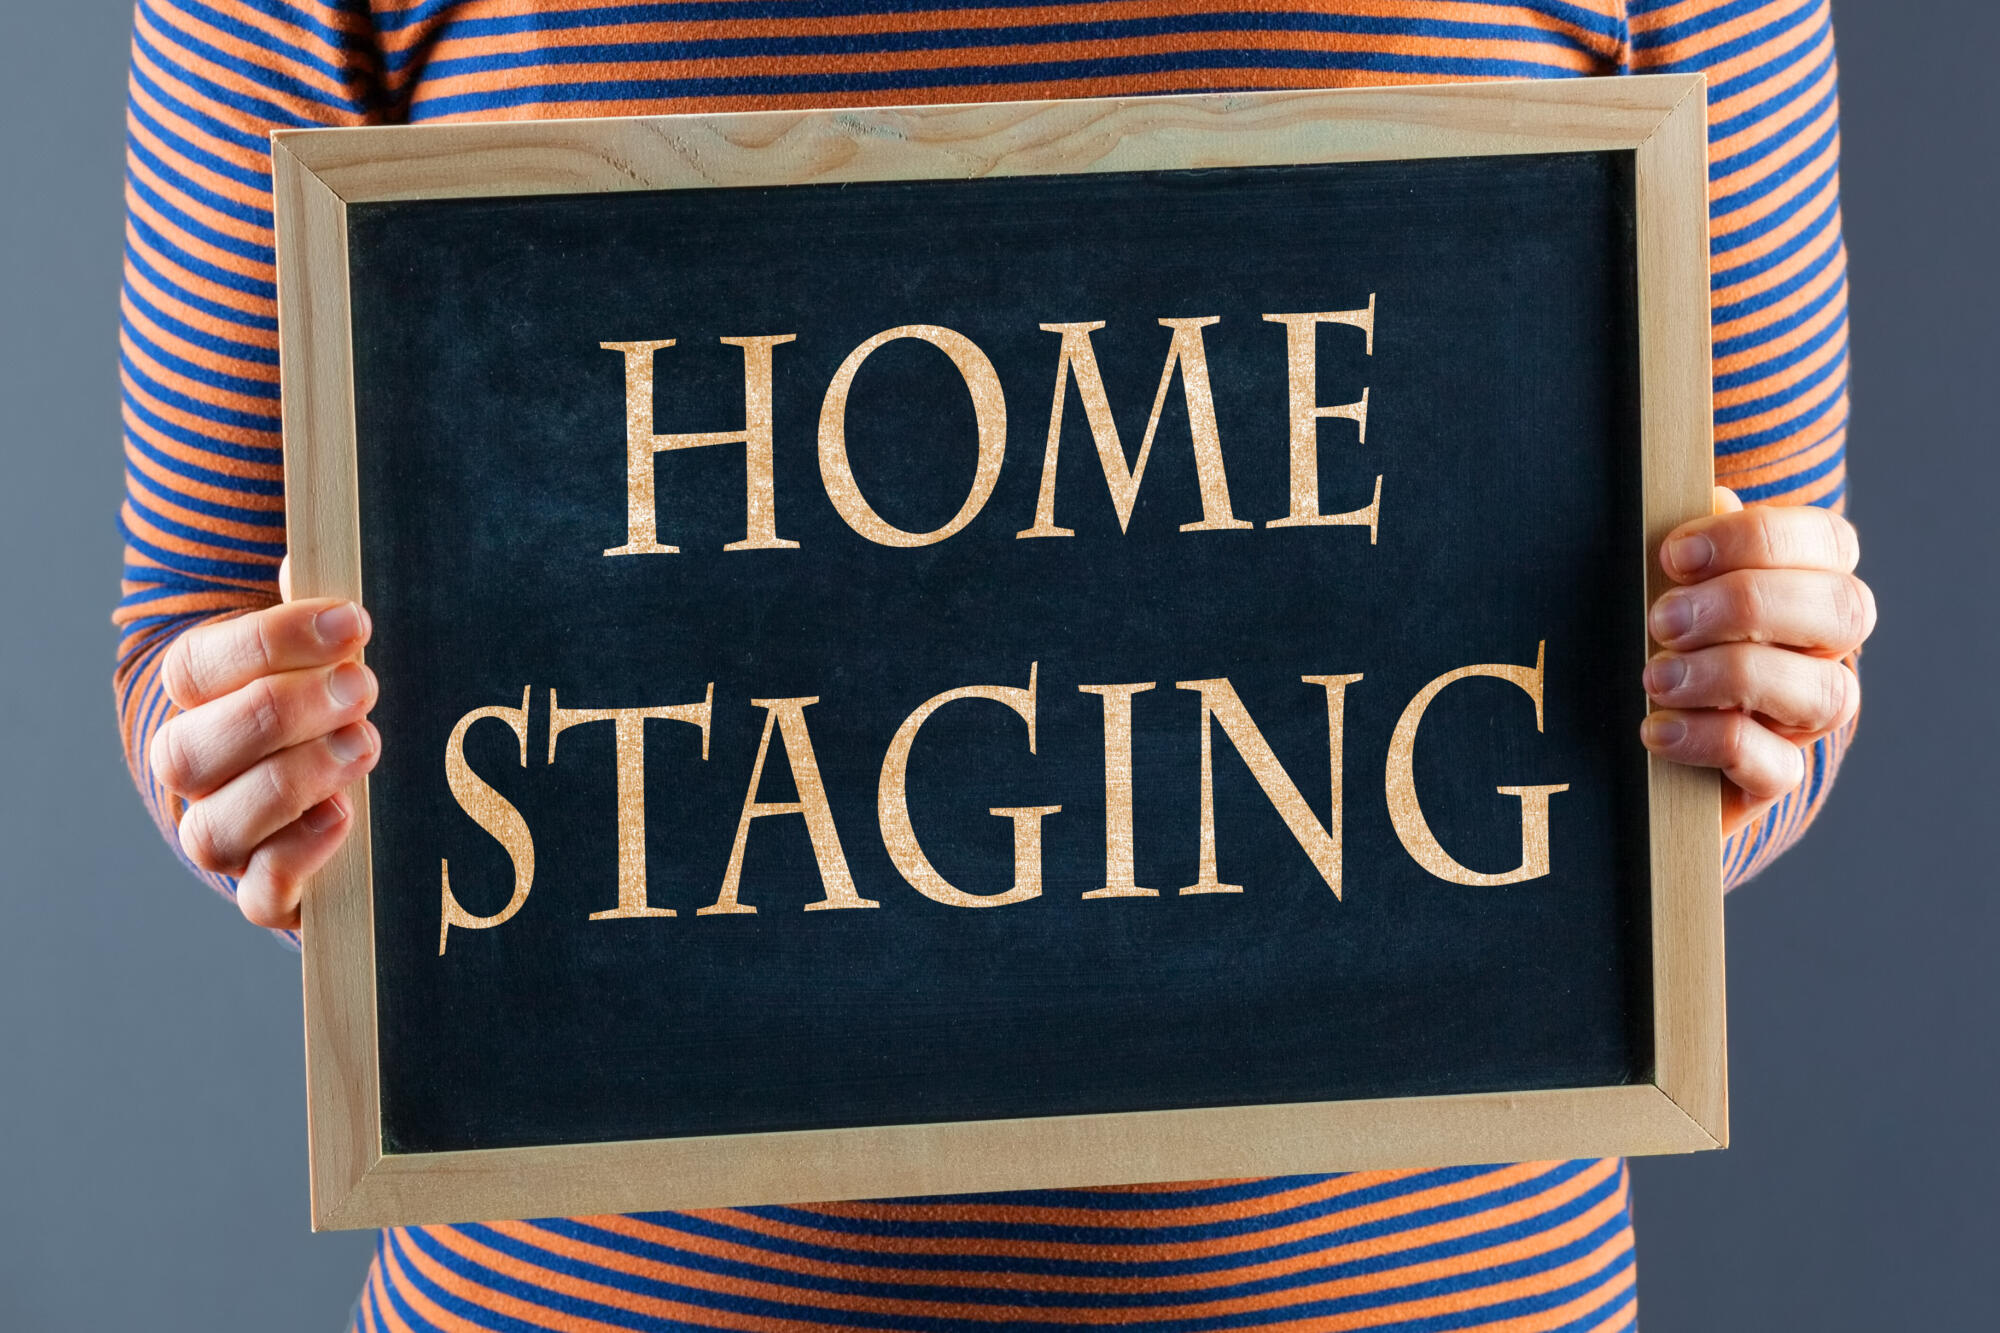 A woman debunking home staging myths by holding up a sign.